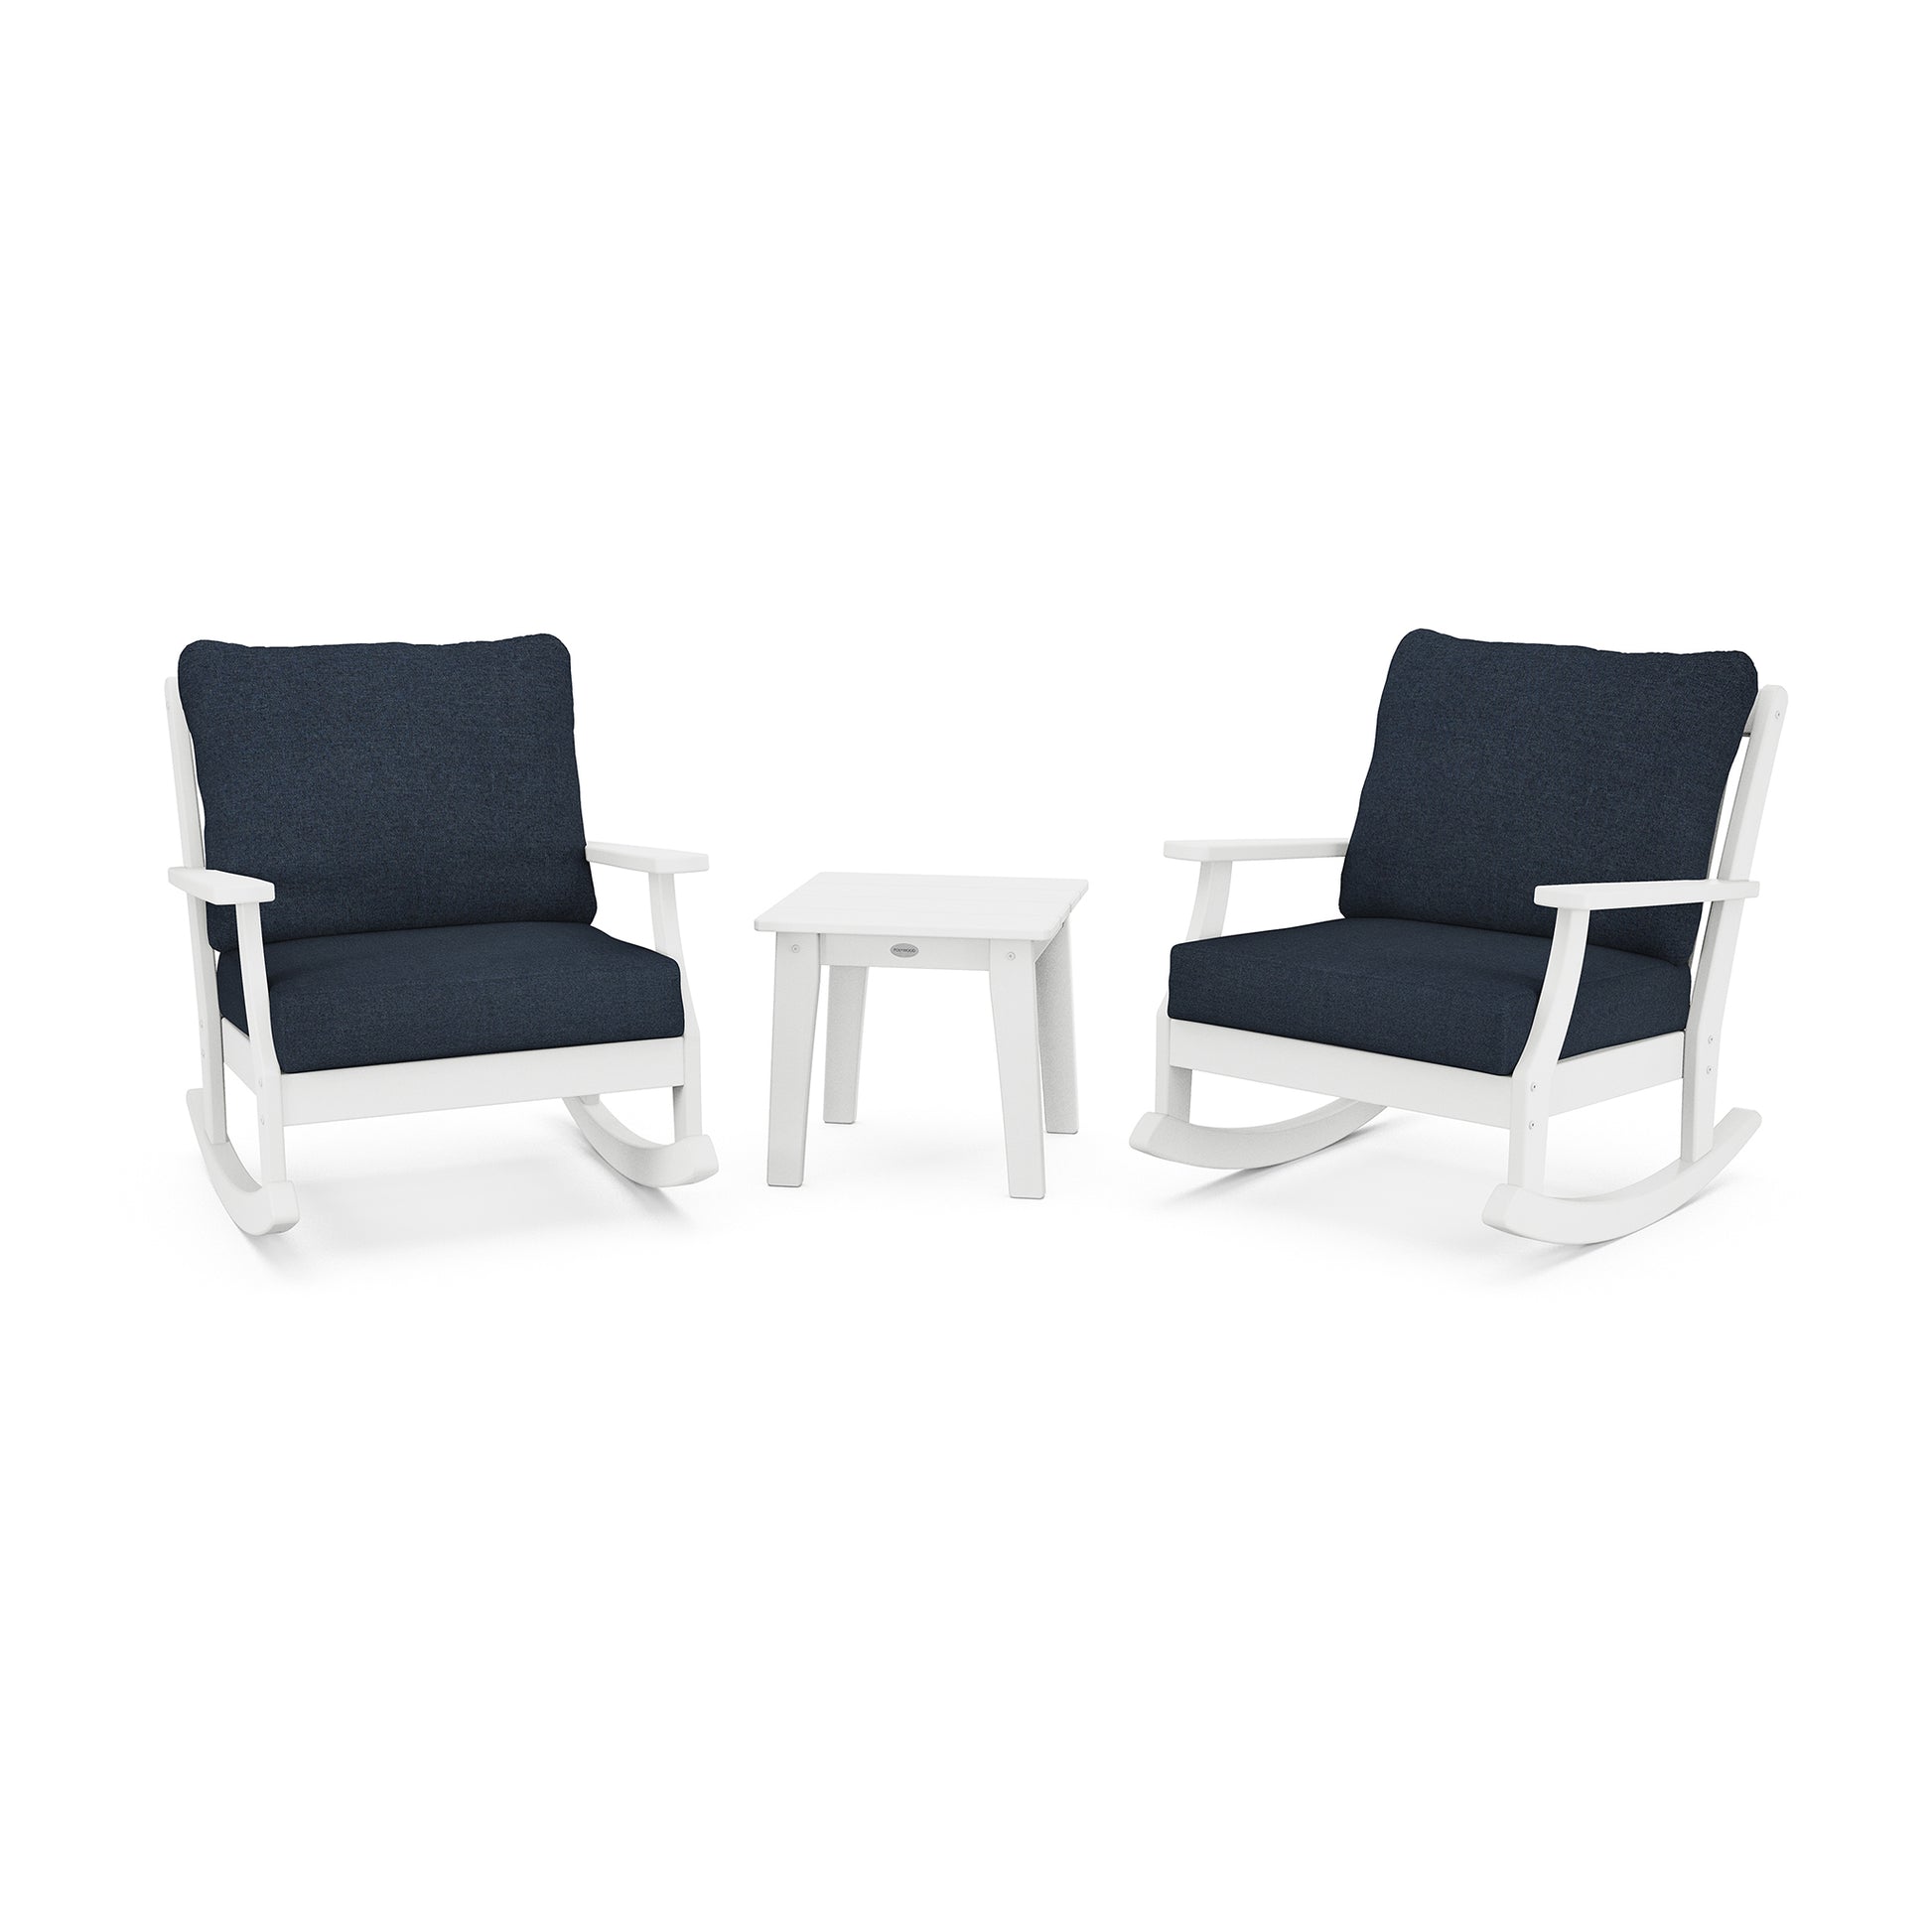 Two POLYWOOD Braxton 3-Piece Deep Seating Rockers with dark blue cushions facing each other, with a small white side table between them, all set against a plain white background.